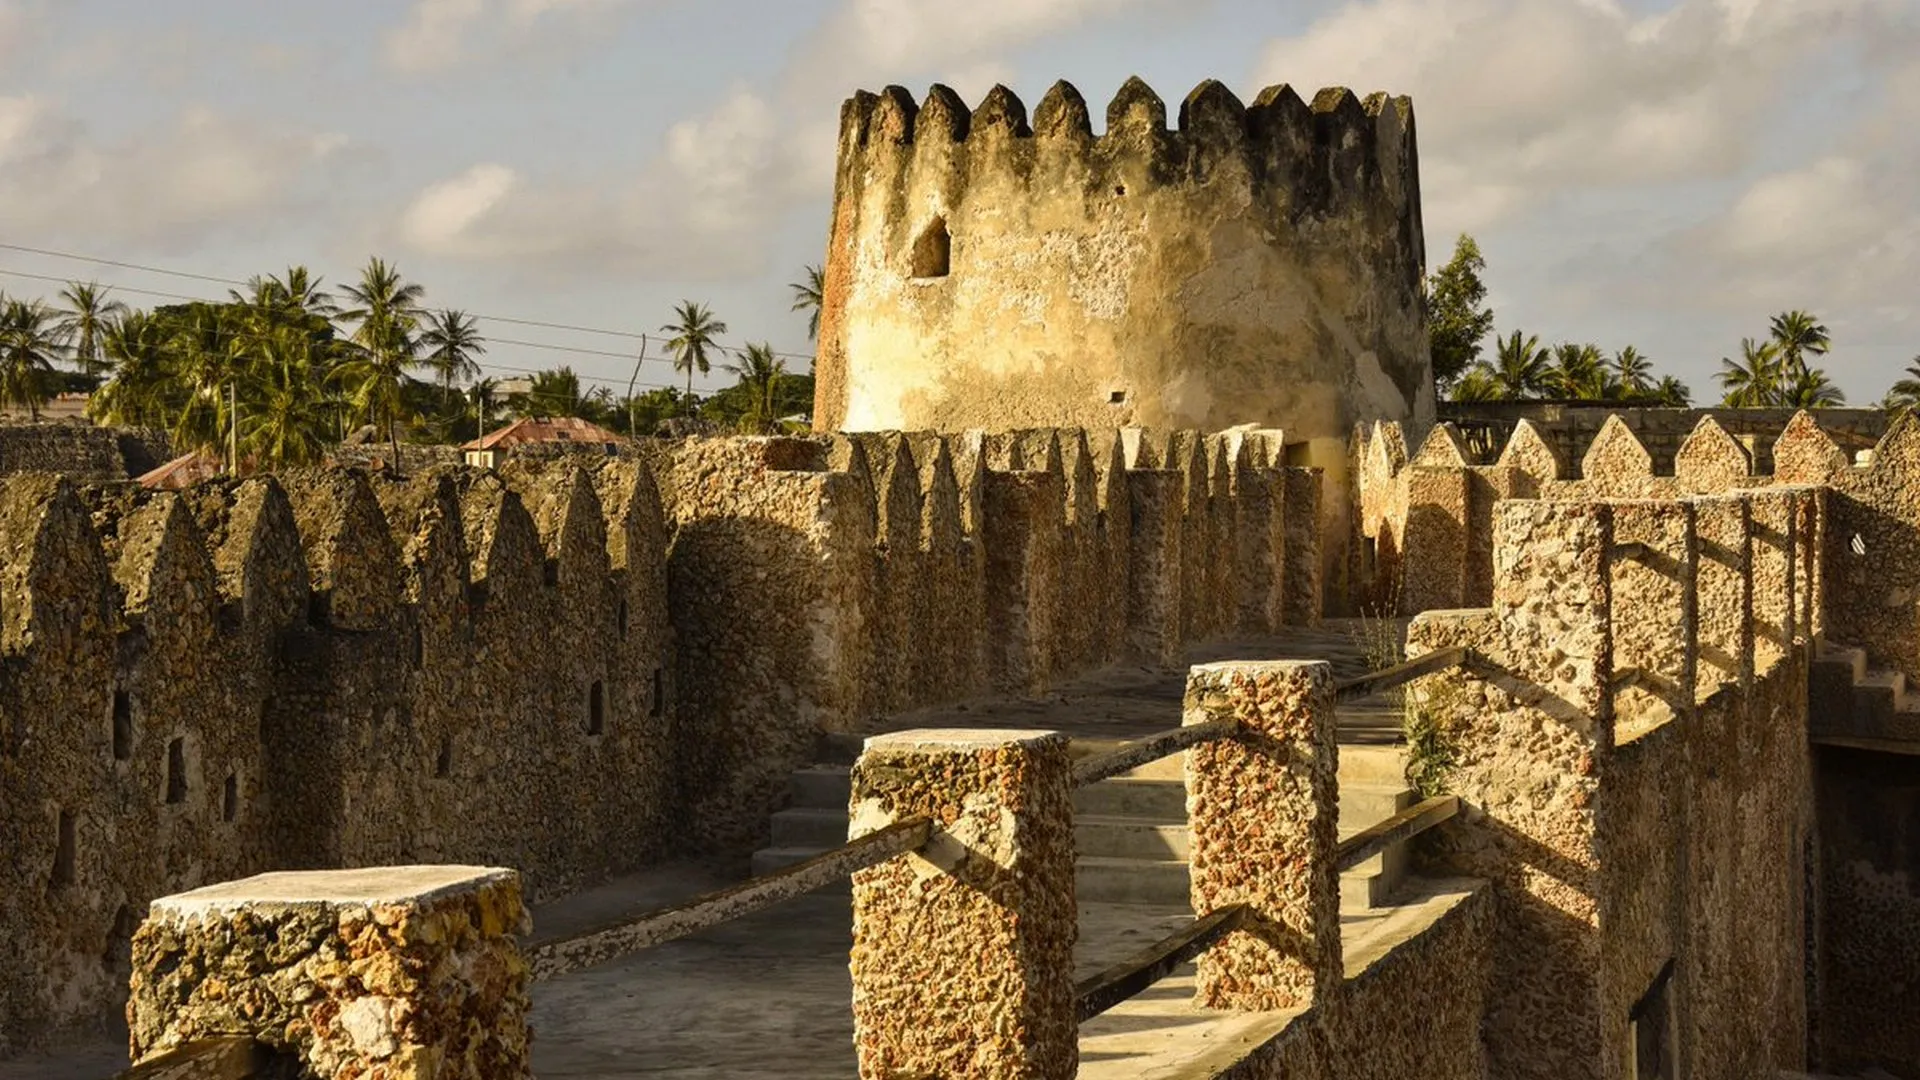 Lamu Fort in Kenya, Africa | Architecture - Rated 3.3